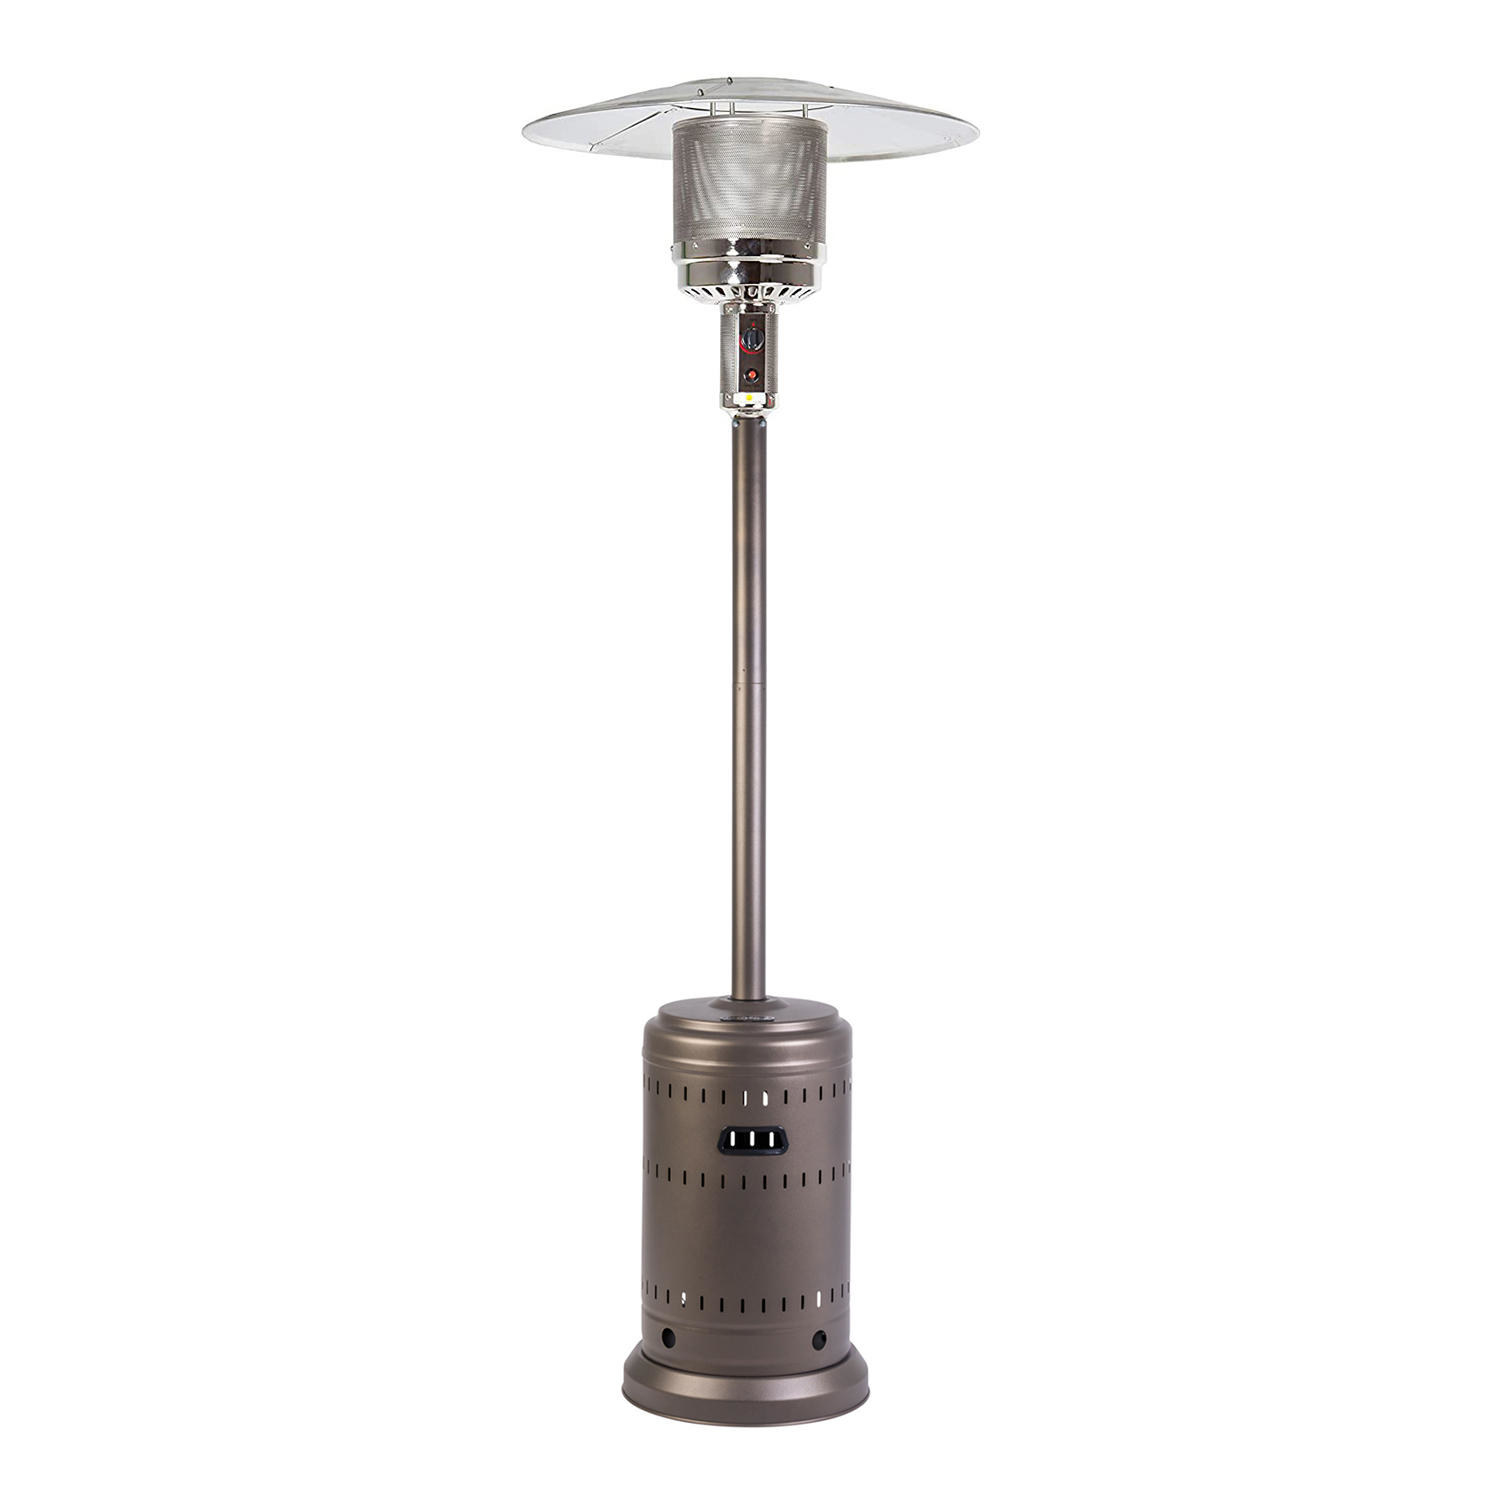 A patio heater that includes built-in wheels and can be used with 20-pound propane tank